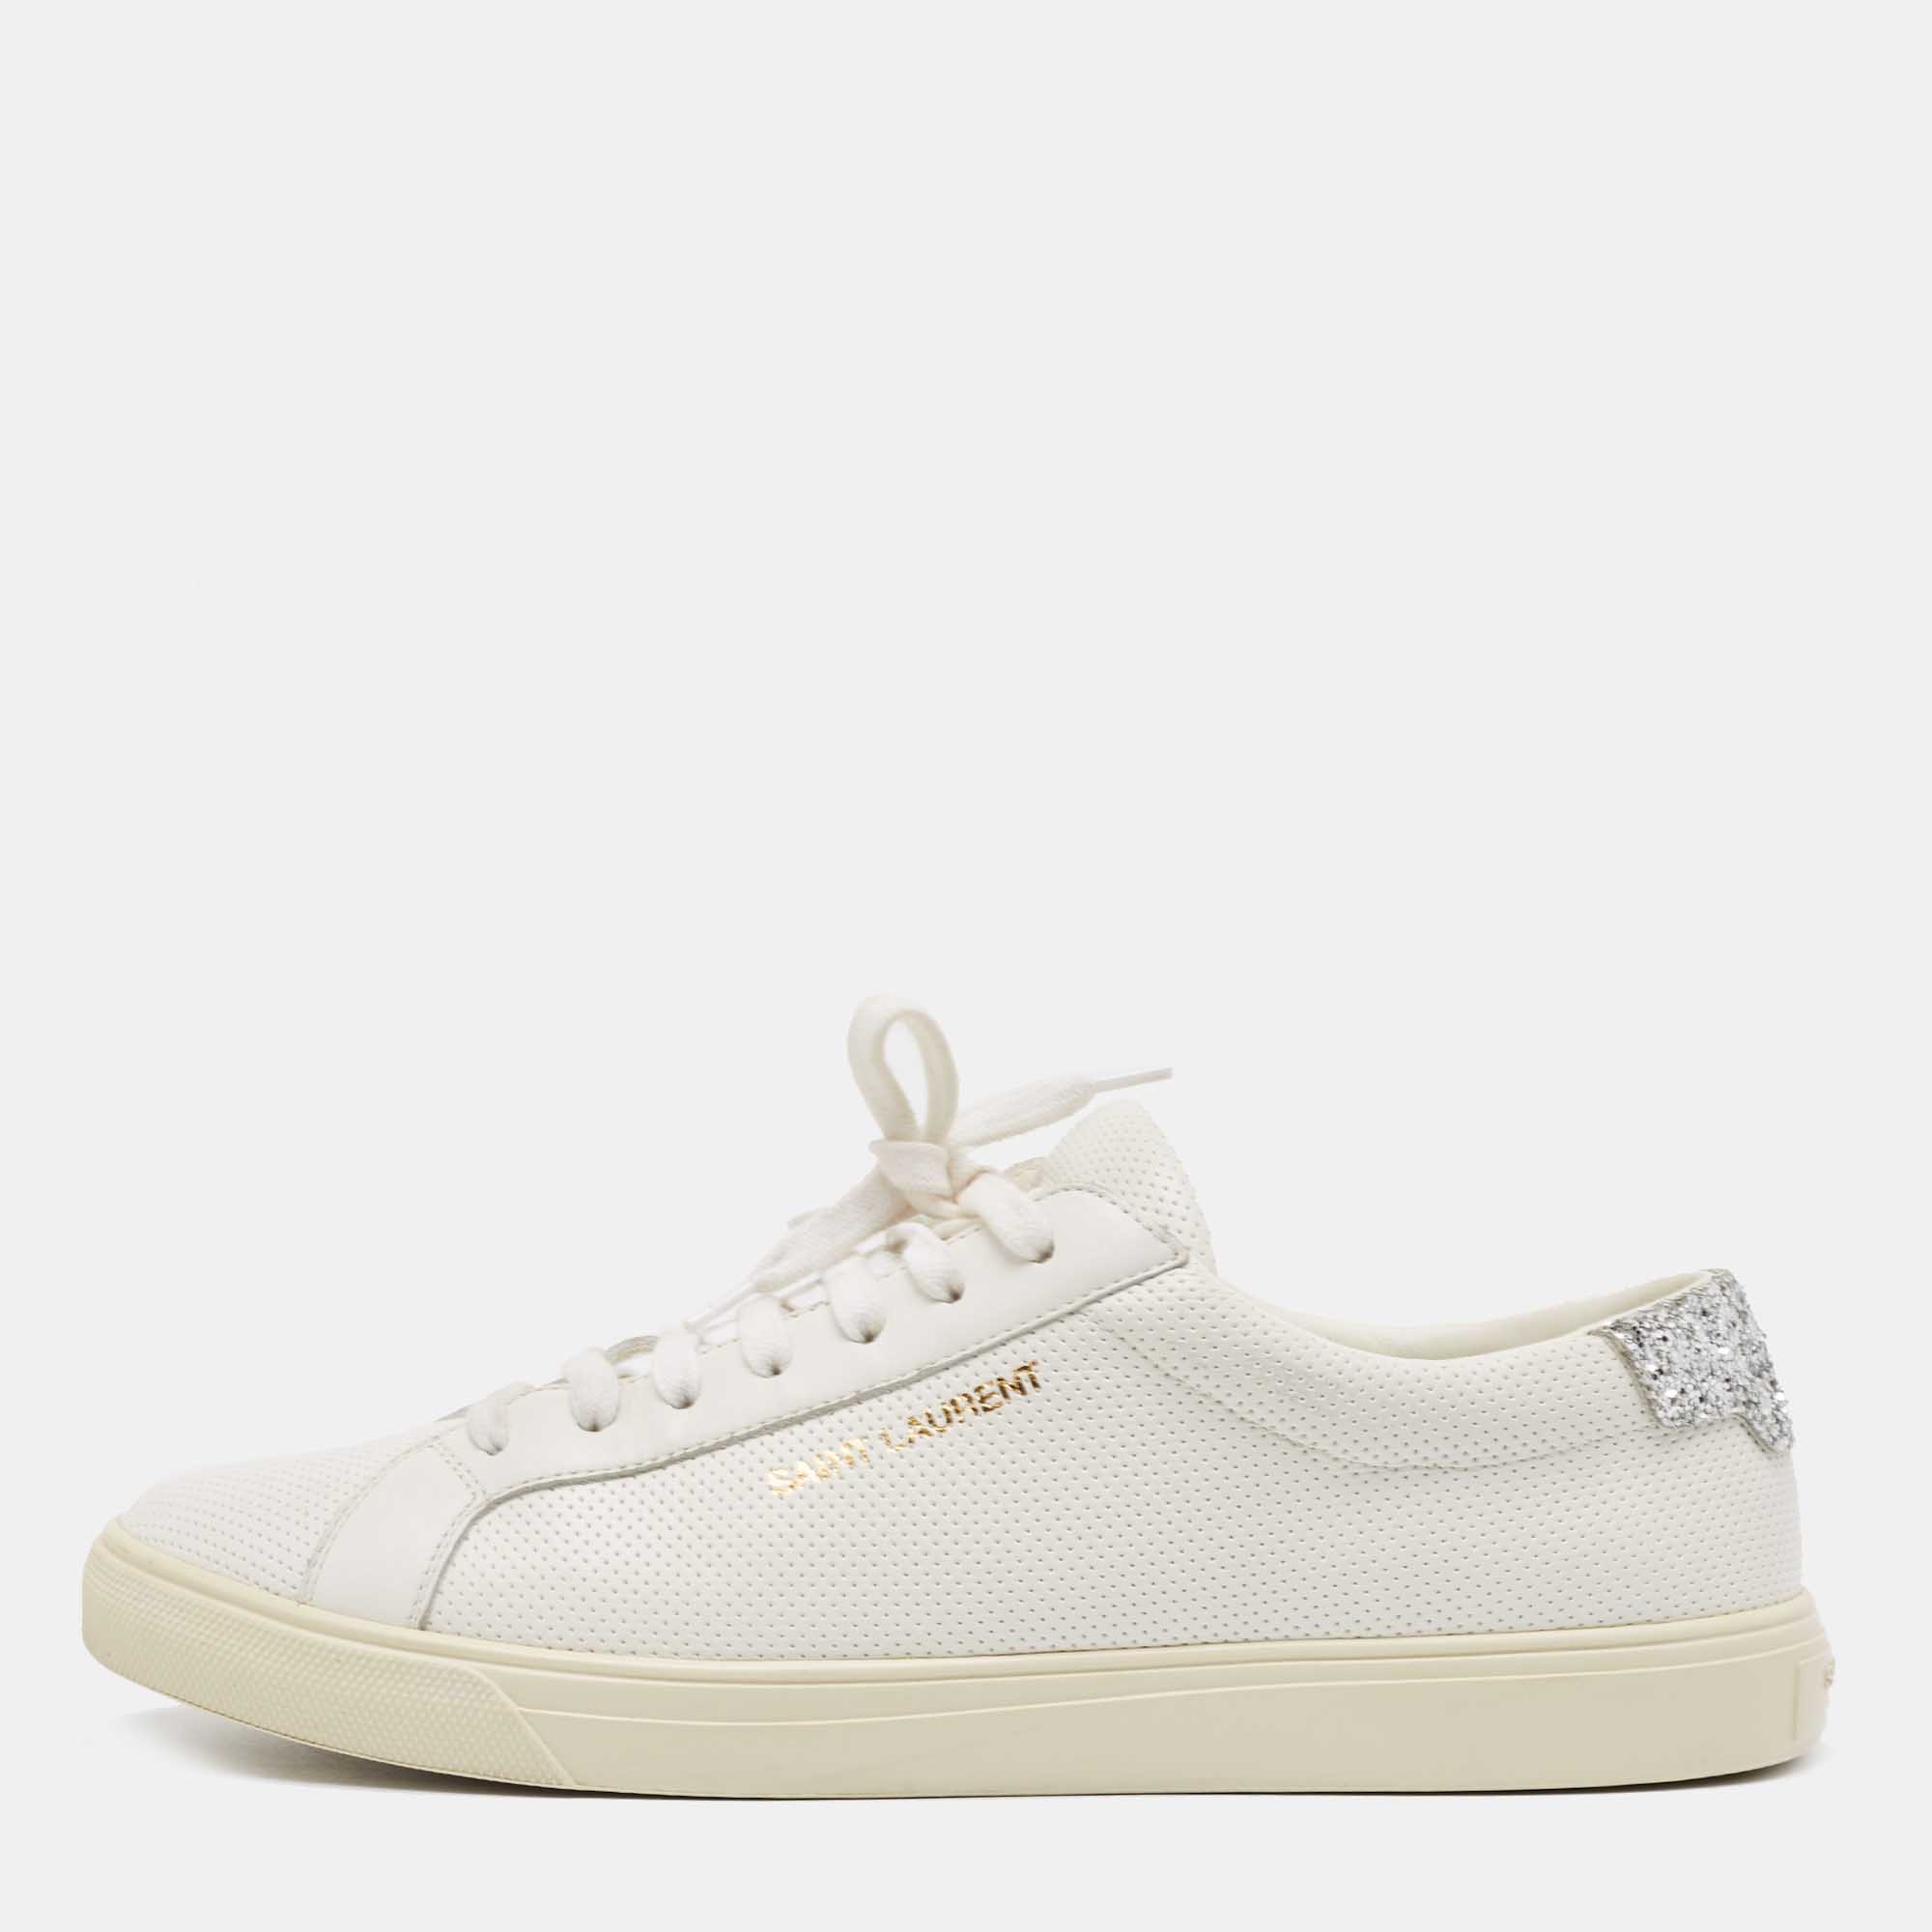 Saint Laurent Silver/White Leather and Glitter Andy Sneakers Size 40